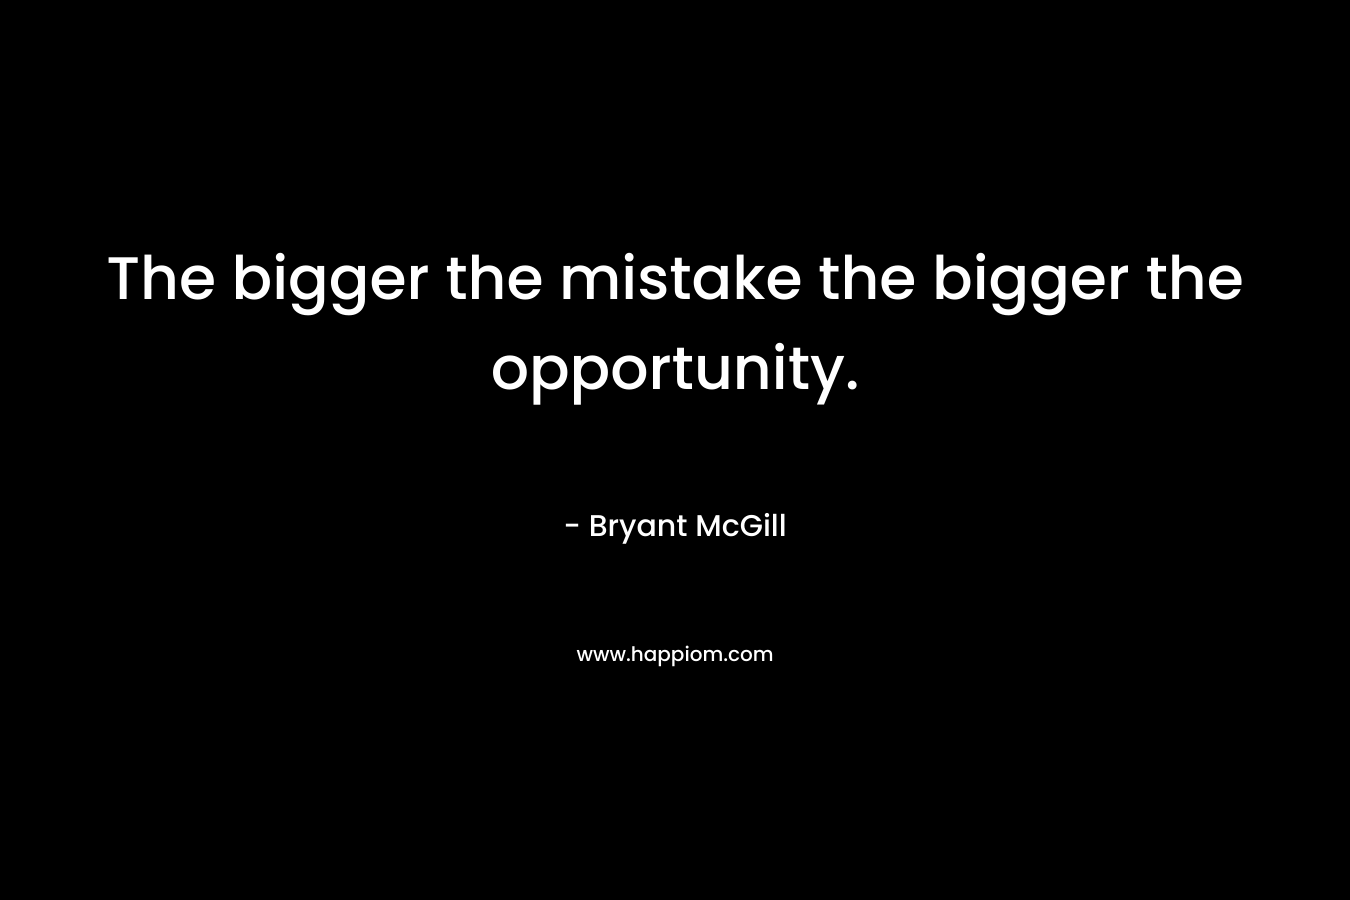 The bigger the mistake the bigger the opportunity.